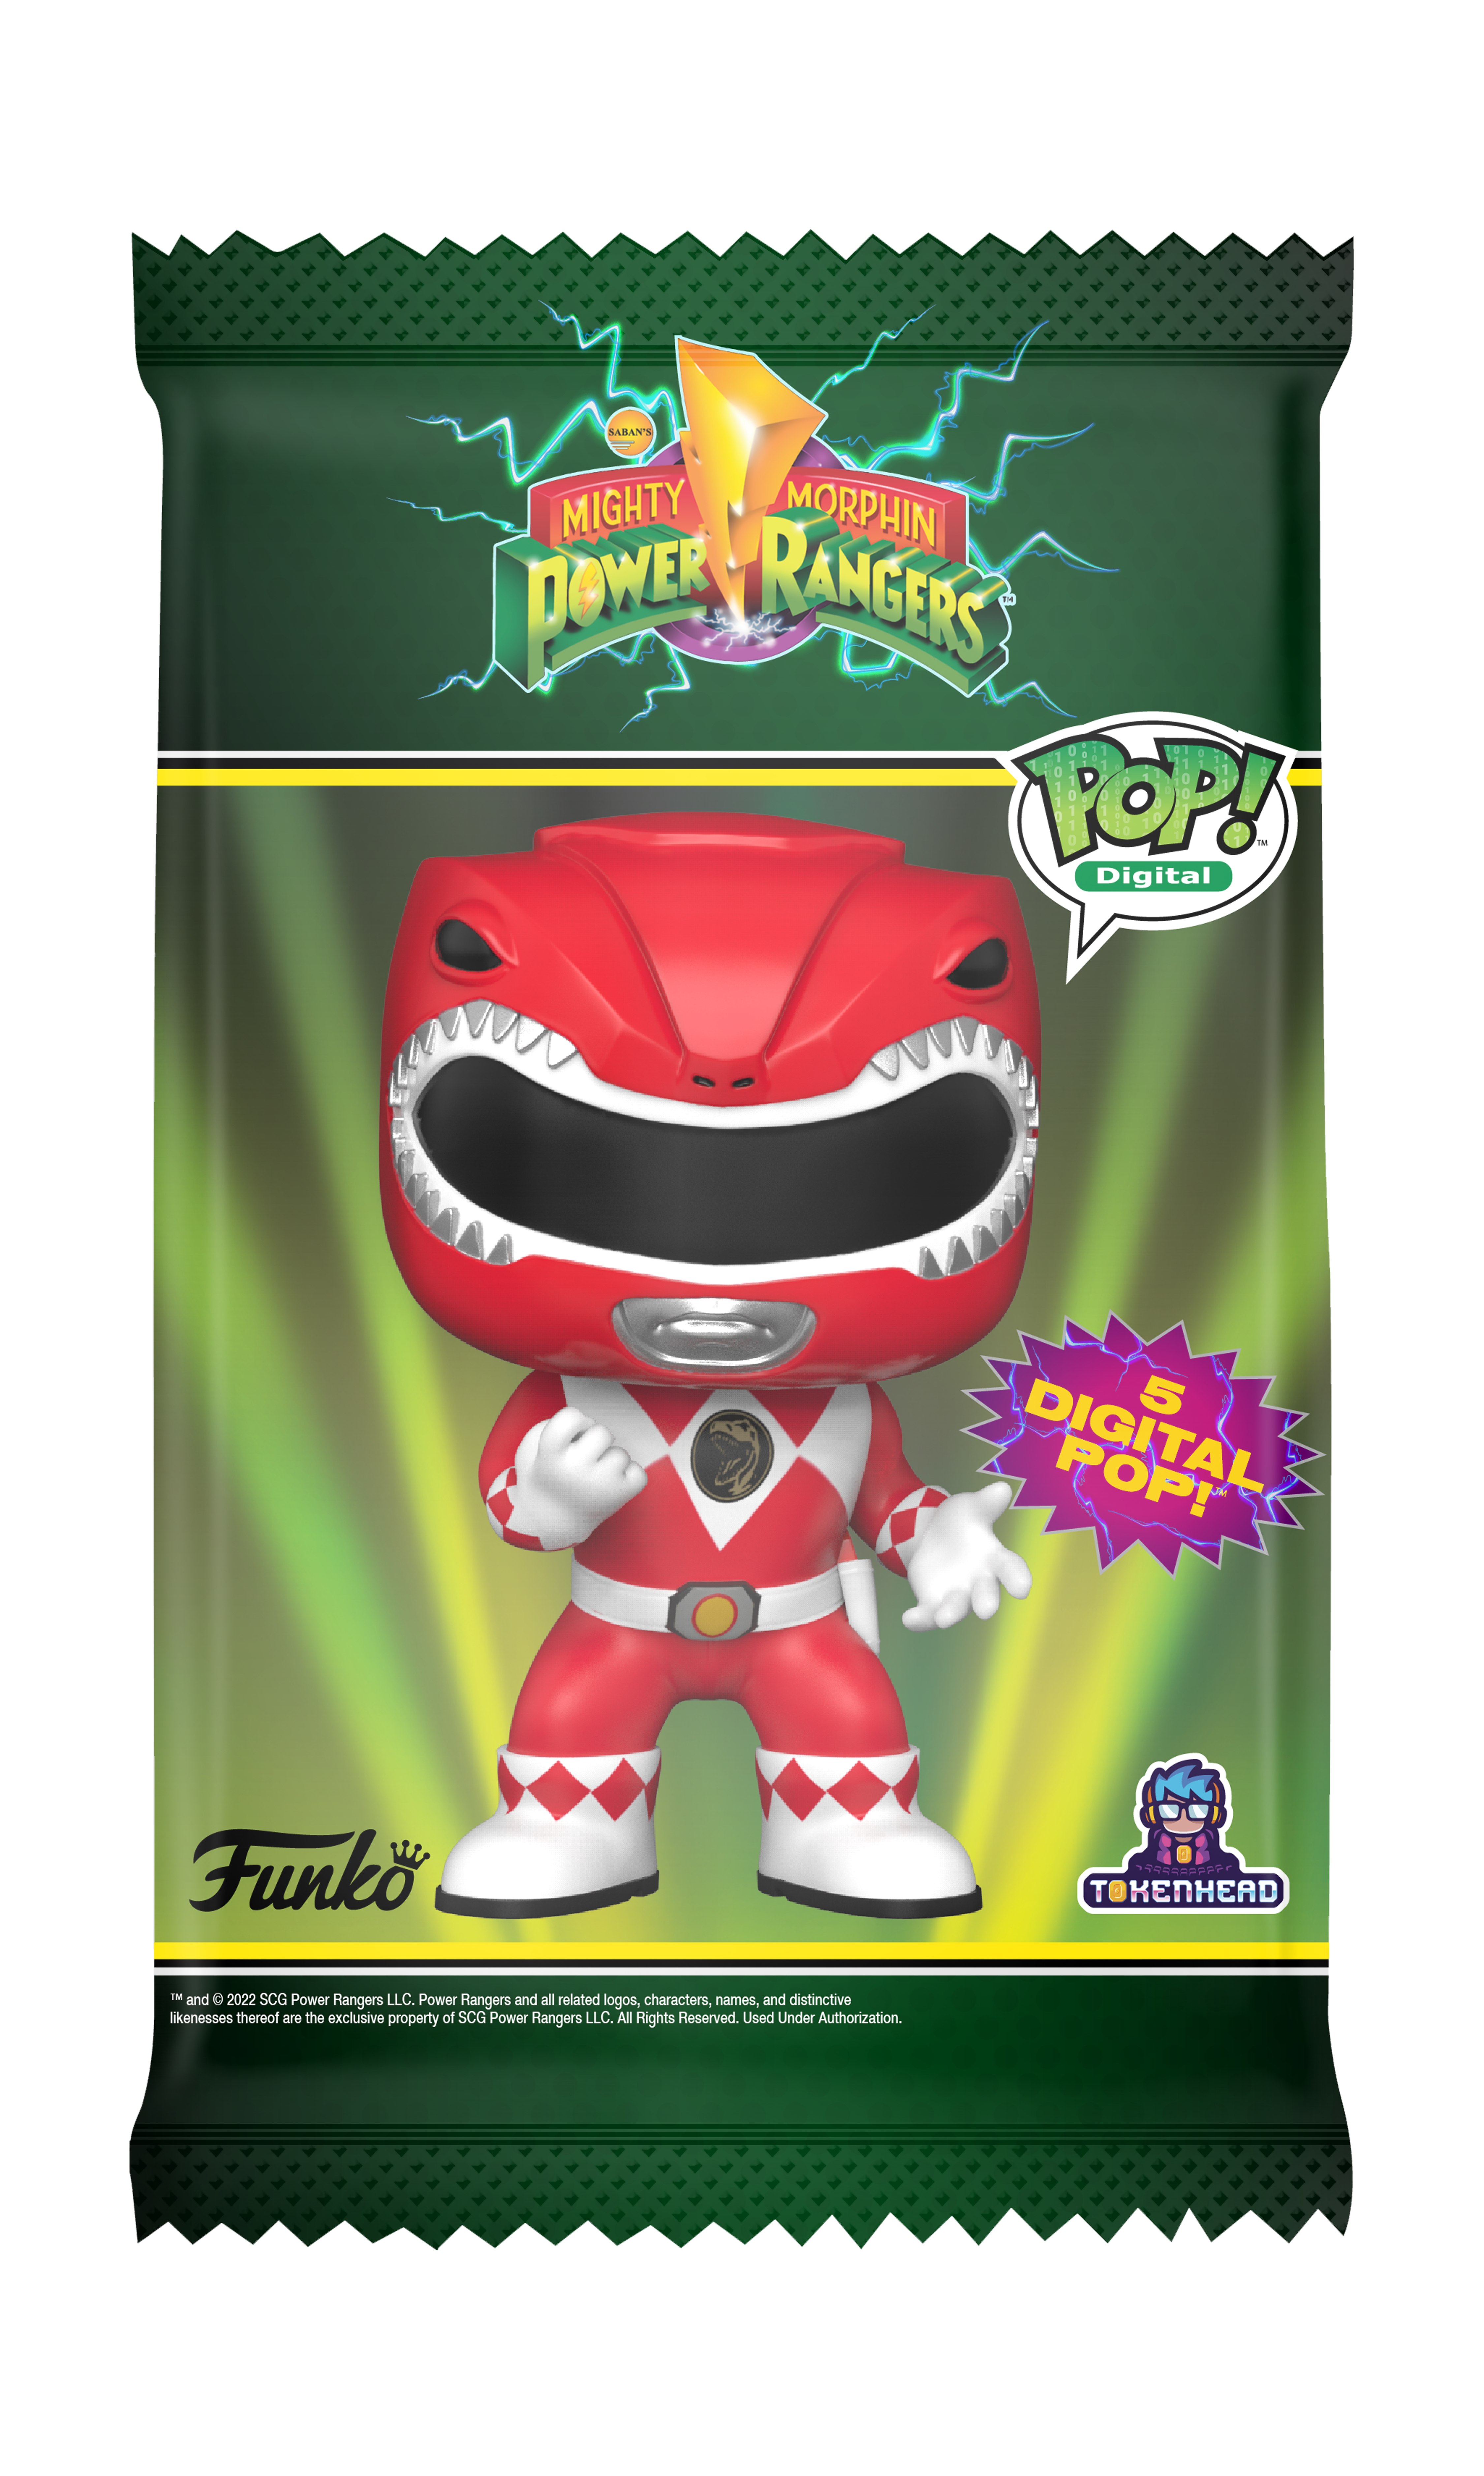 Featured image for “POWER RANGERS FUNKOS NFTS ON WAX_IO”